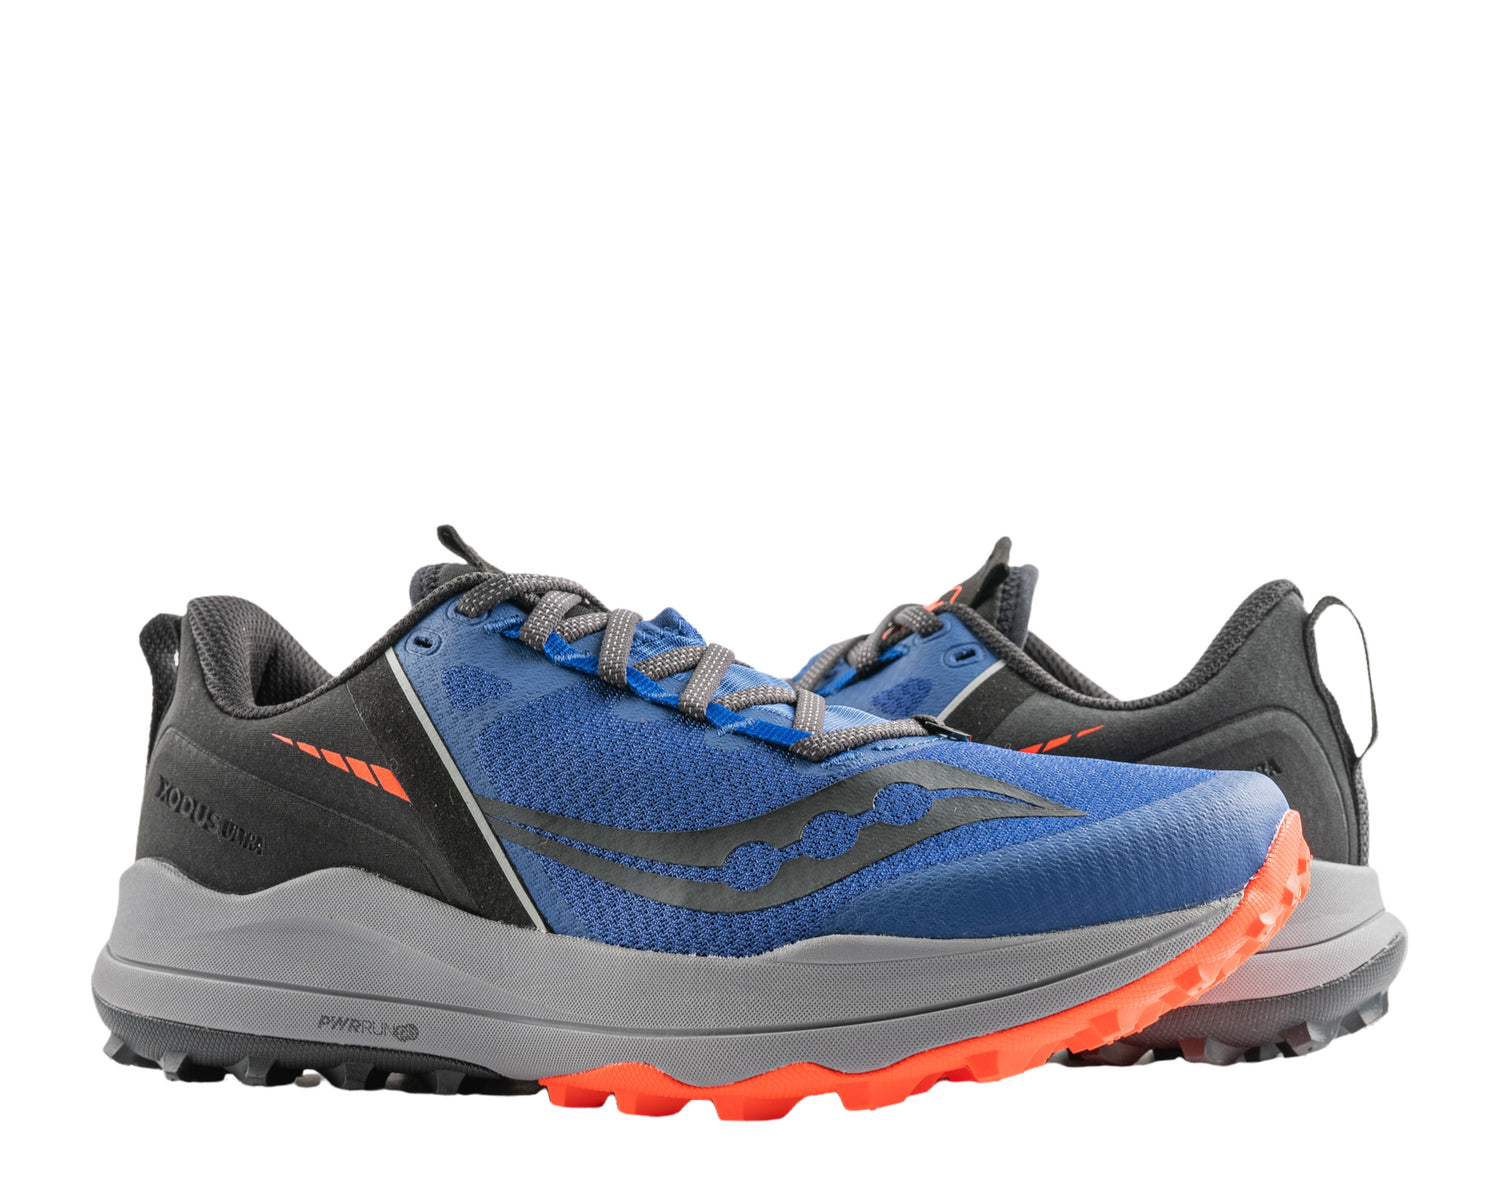 Saucony Xodus Ultra Men's Trail Running Shoes